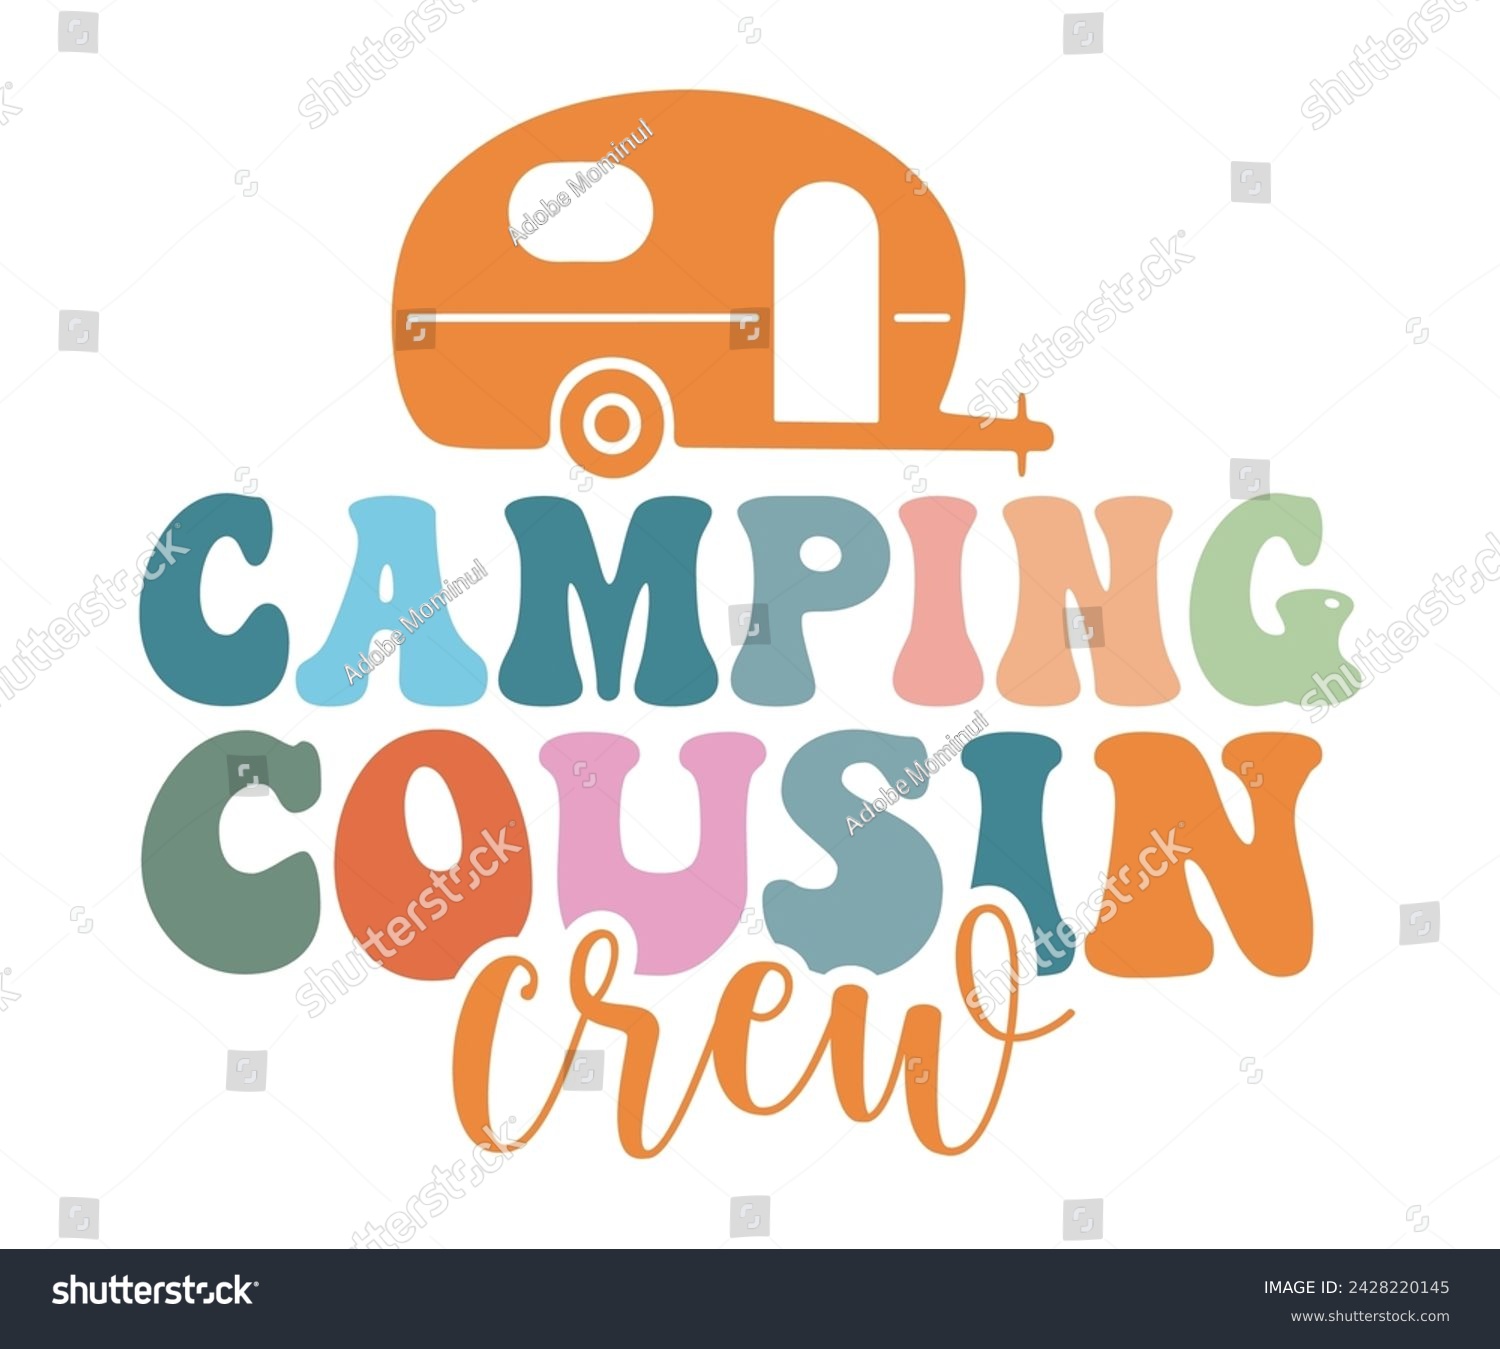 SVG of Camping Cousin Crew Retro,Happy Camper Svg,Camping Svg,Adventure Svg,Hiking Svg,Camp Saying,Camp Life Svg,Svg Cut Files, Png,Mountain T-shirt,Instant Download svg